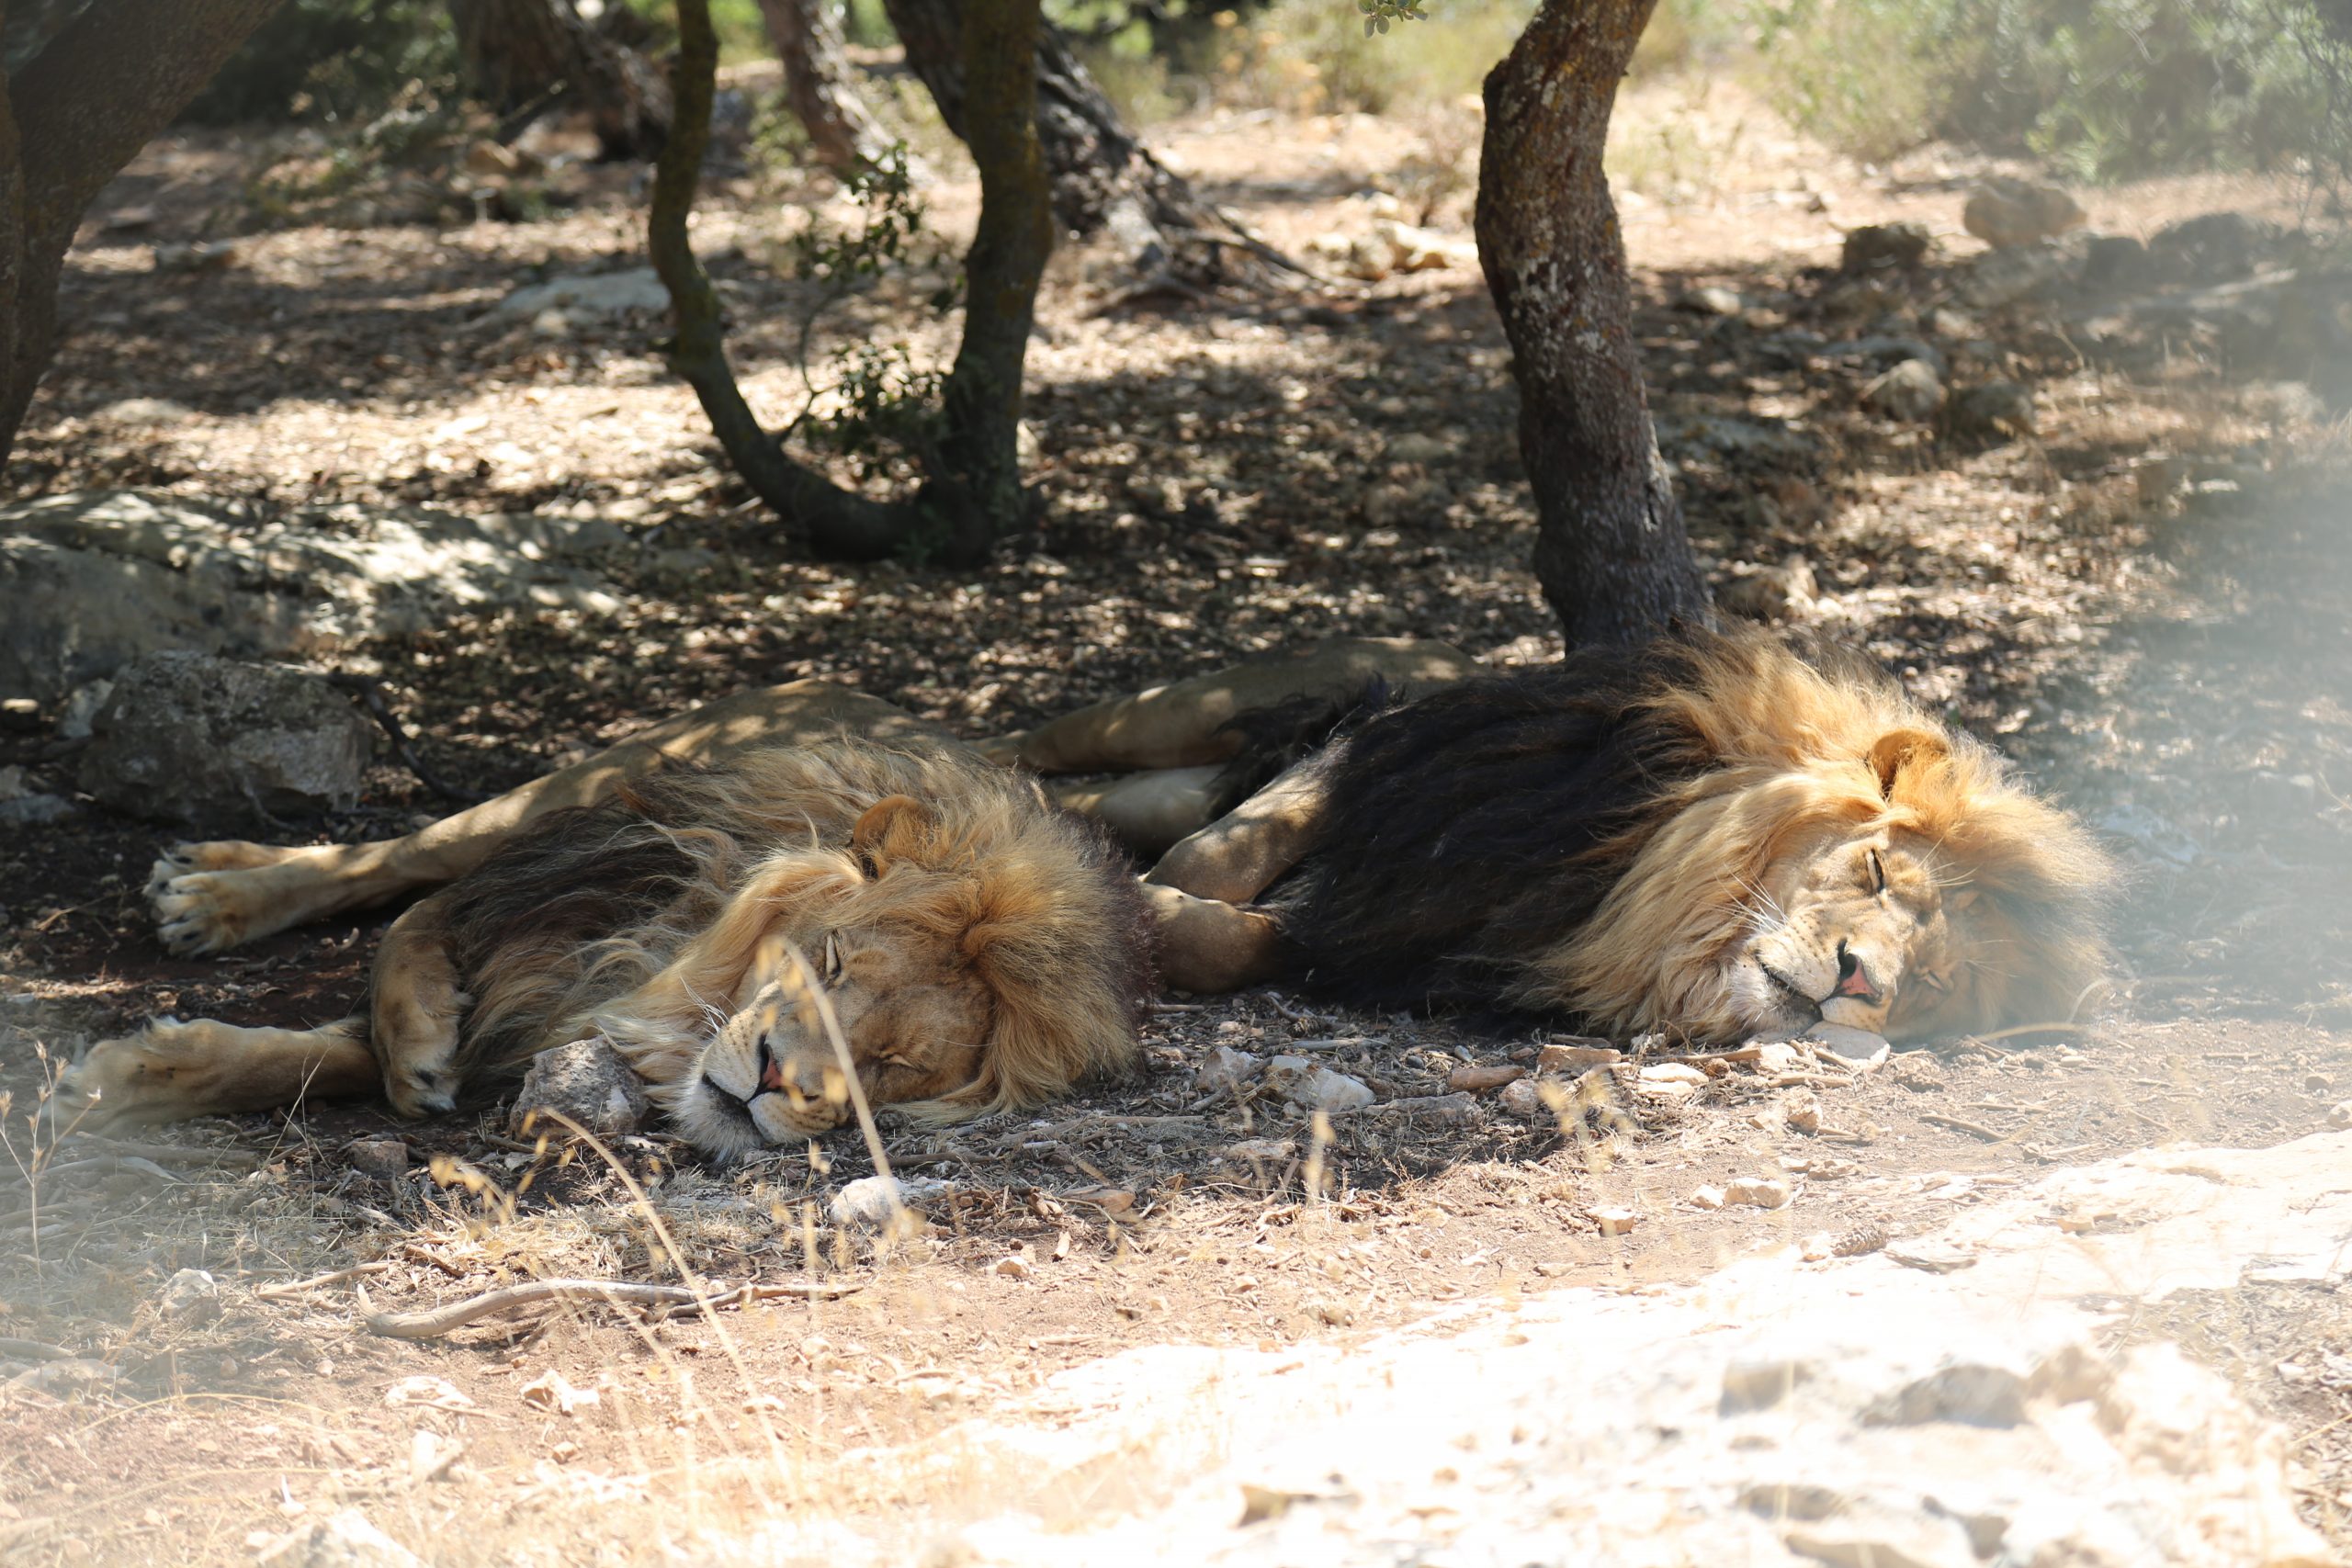 Bayhas and Yerga napping during the day